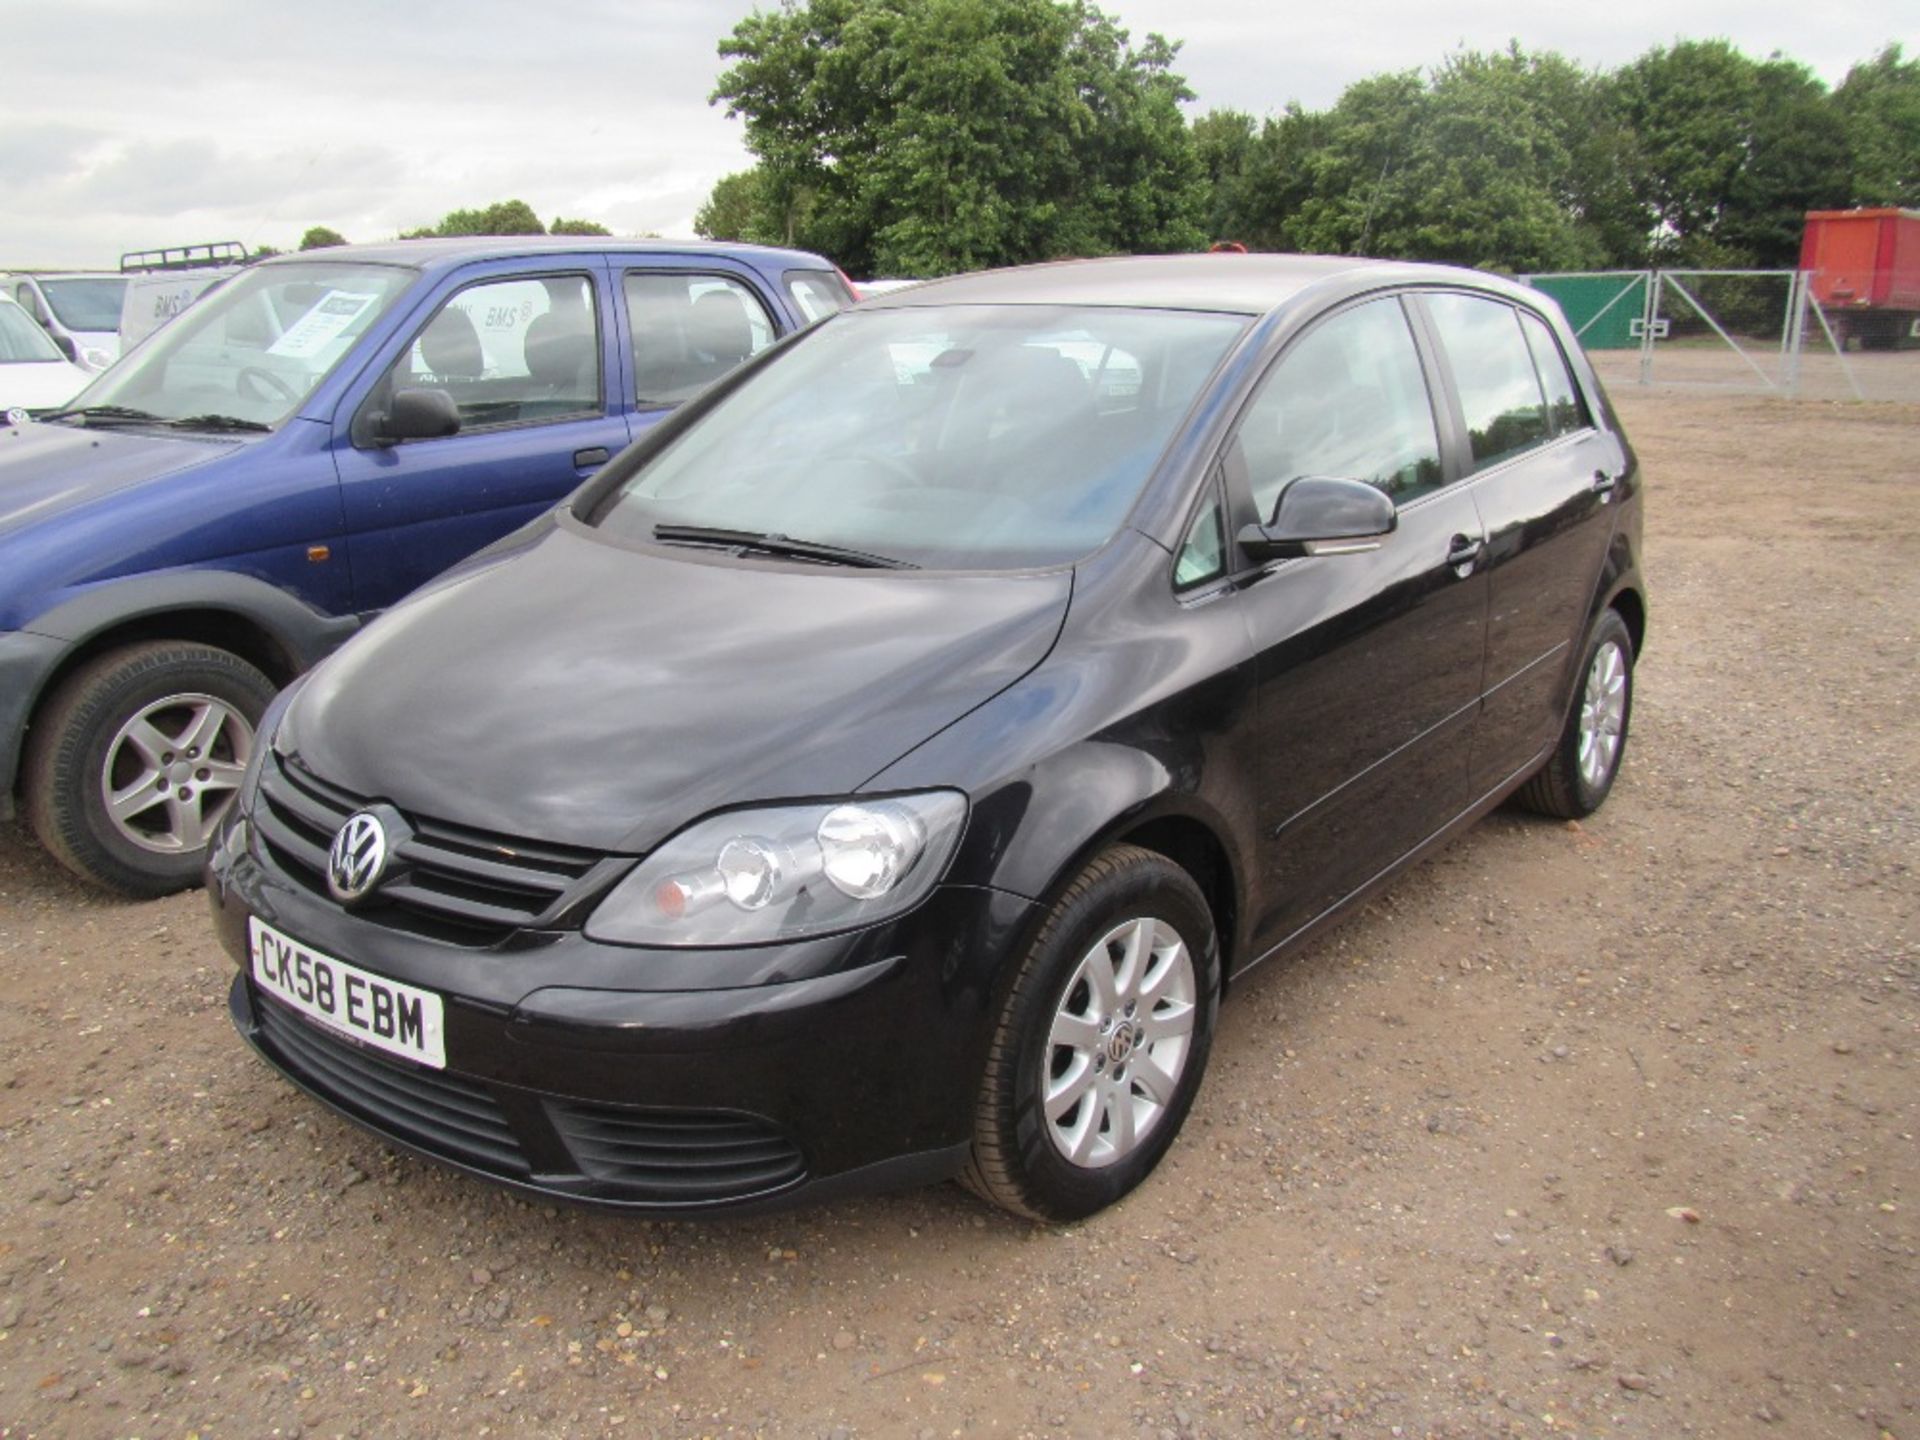 2008 VW Golf Plus 1.4 TS1. One Previous Owner. Reg. Docs will be supplied. Mileage: 79,400. MOT till